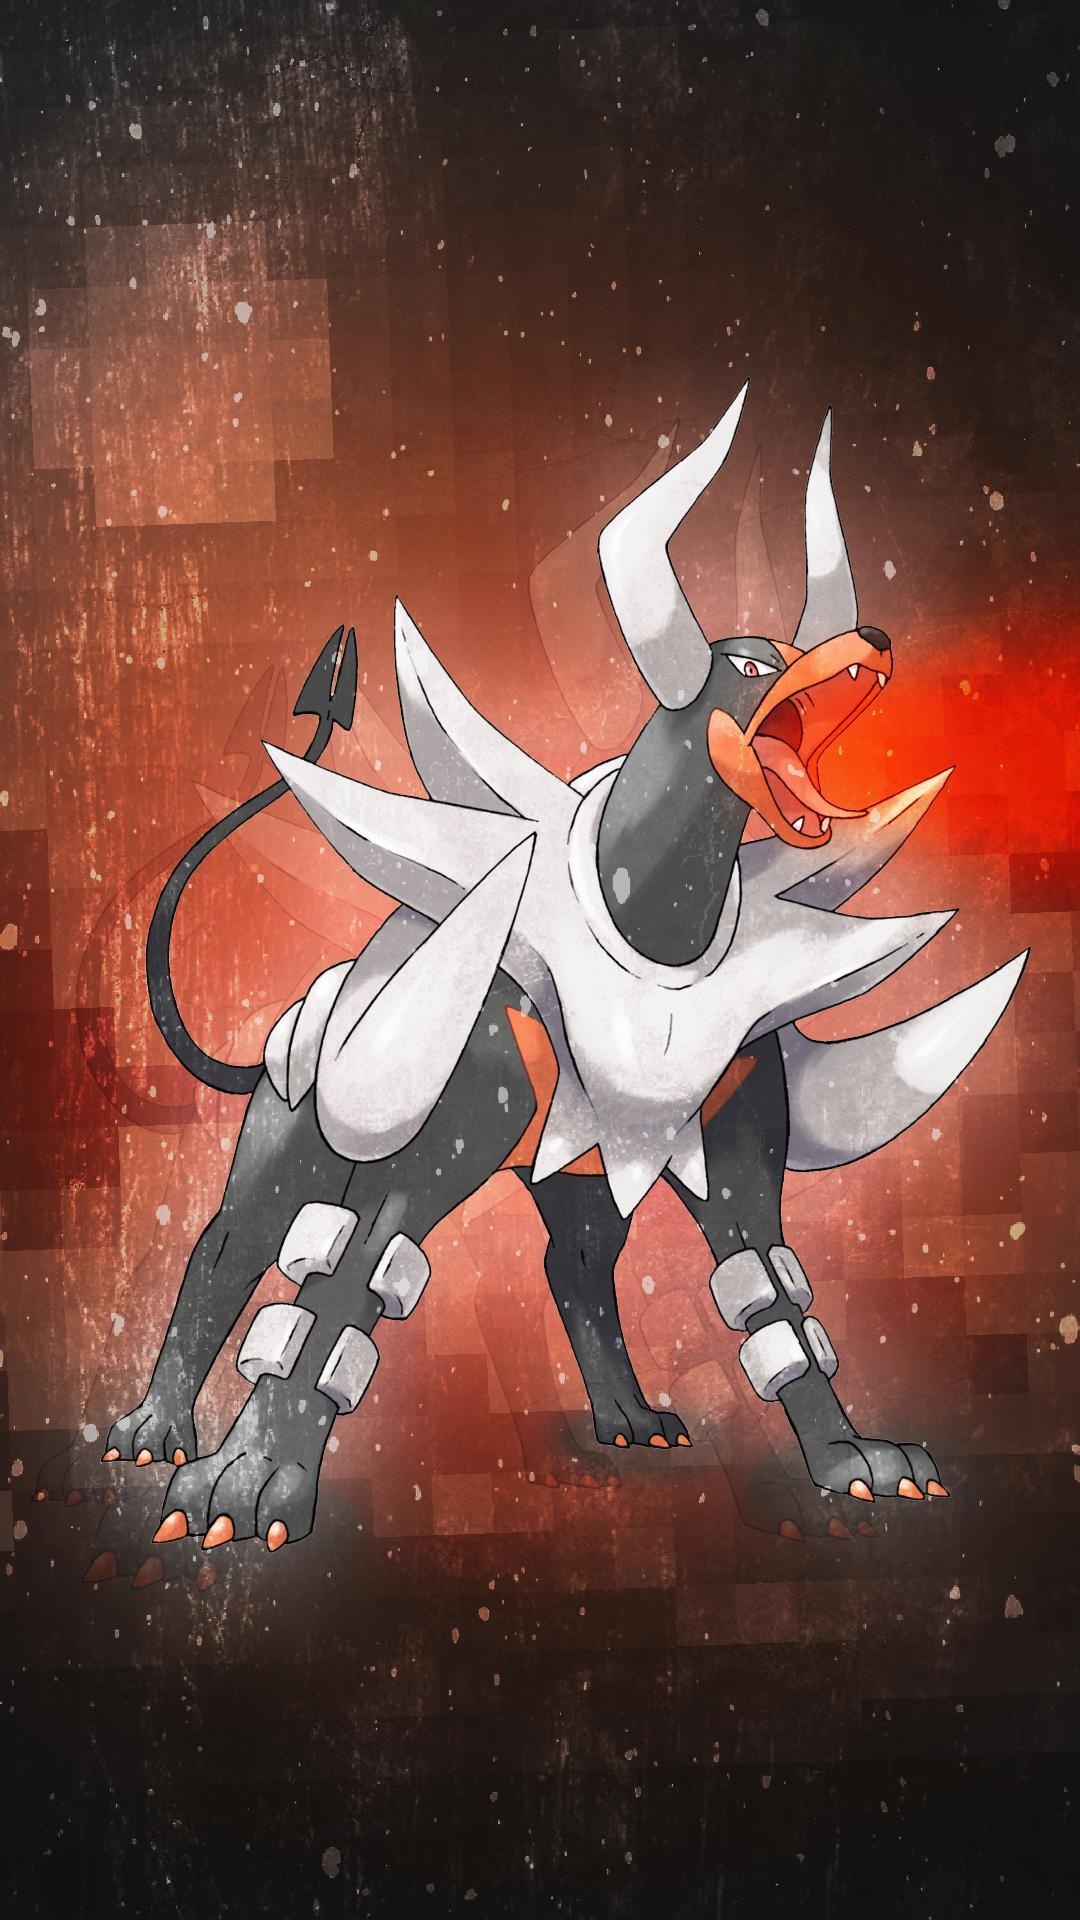 Houndoom wallpapers, Top free backgrounds, Pokemon wallpapers, Gaming enthusiasts, 1080x1920 Full HD Handy